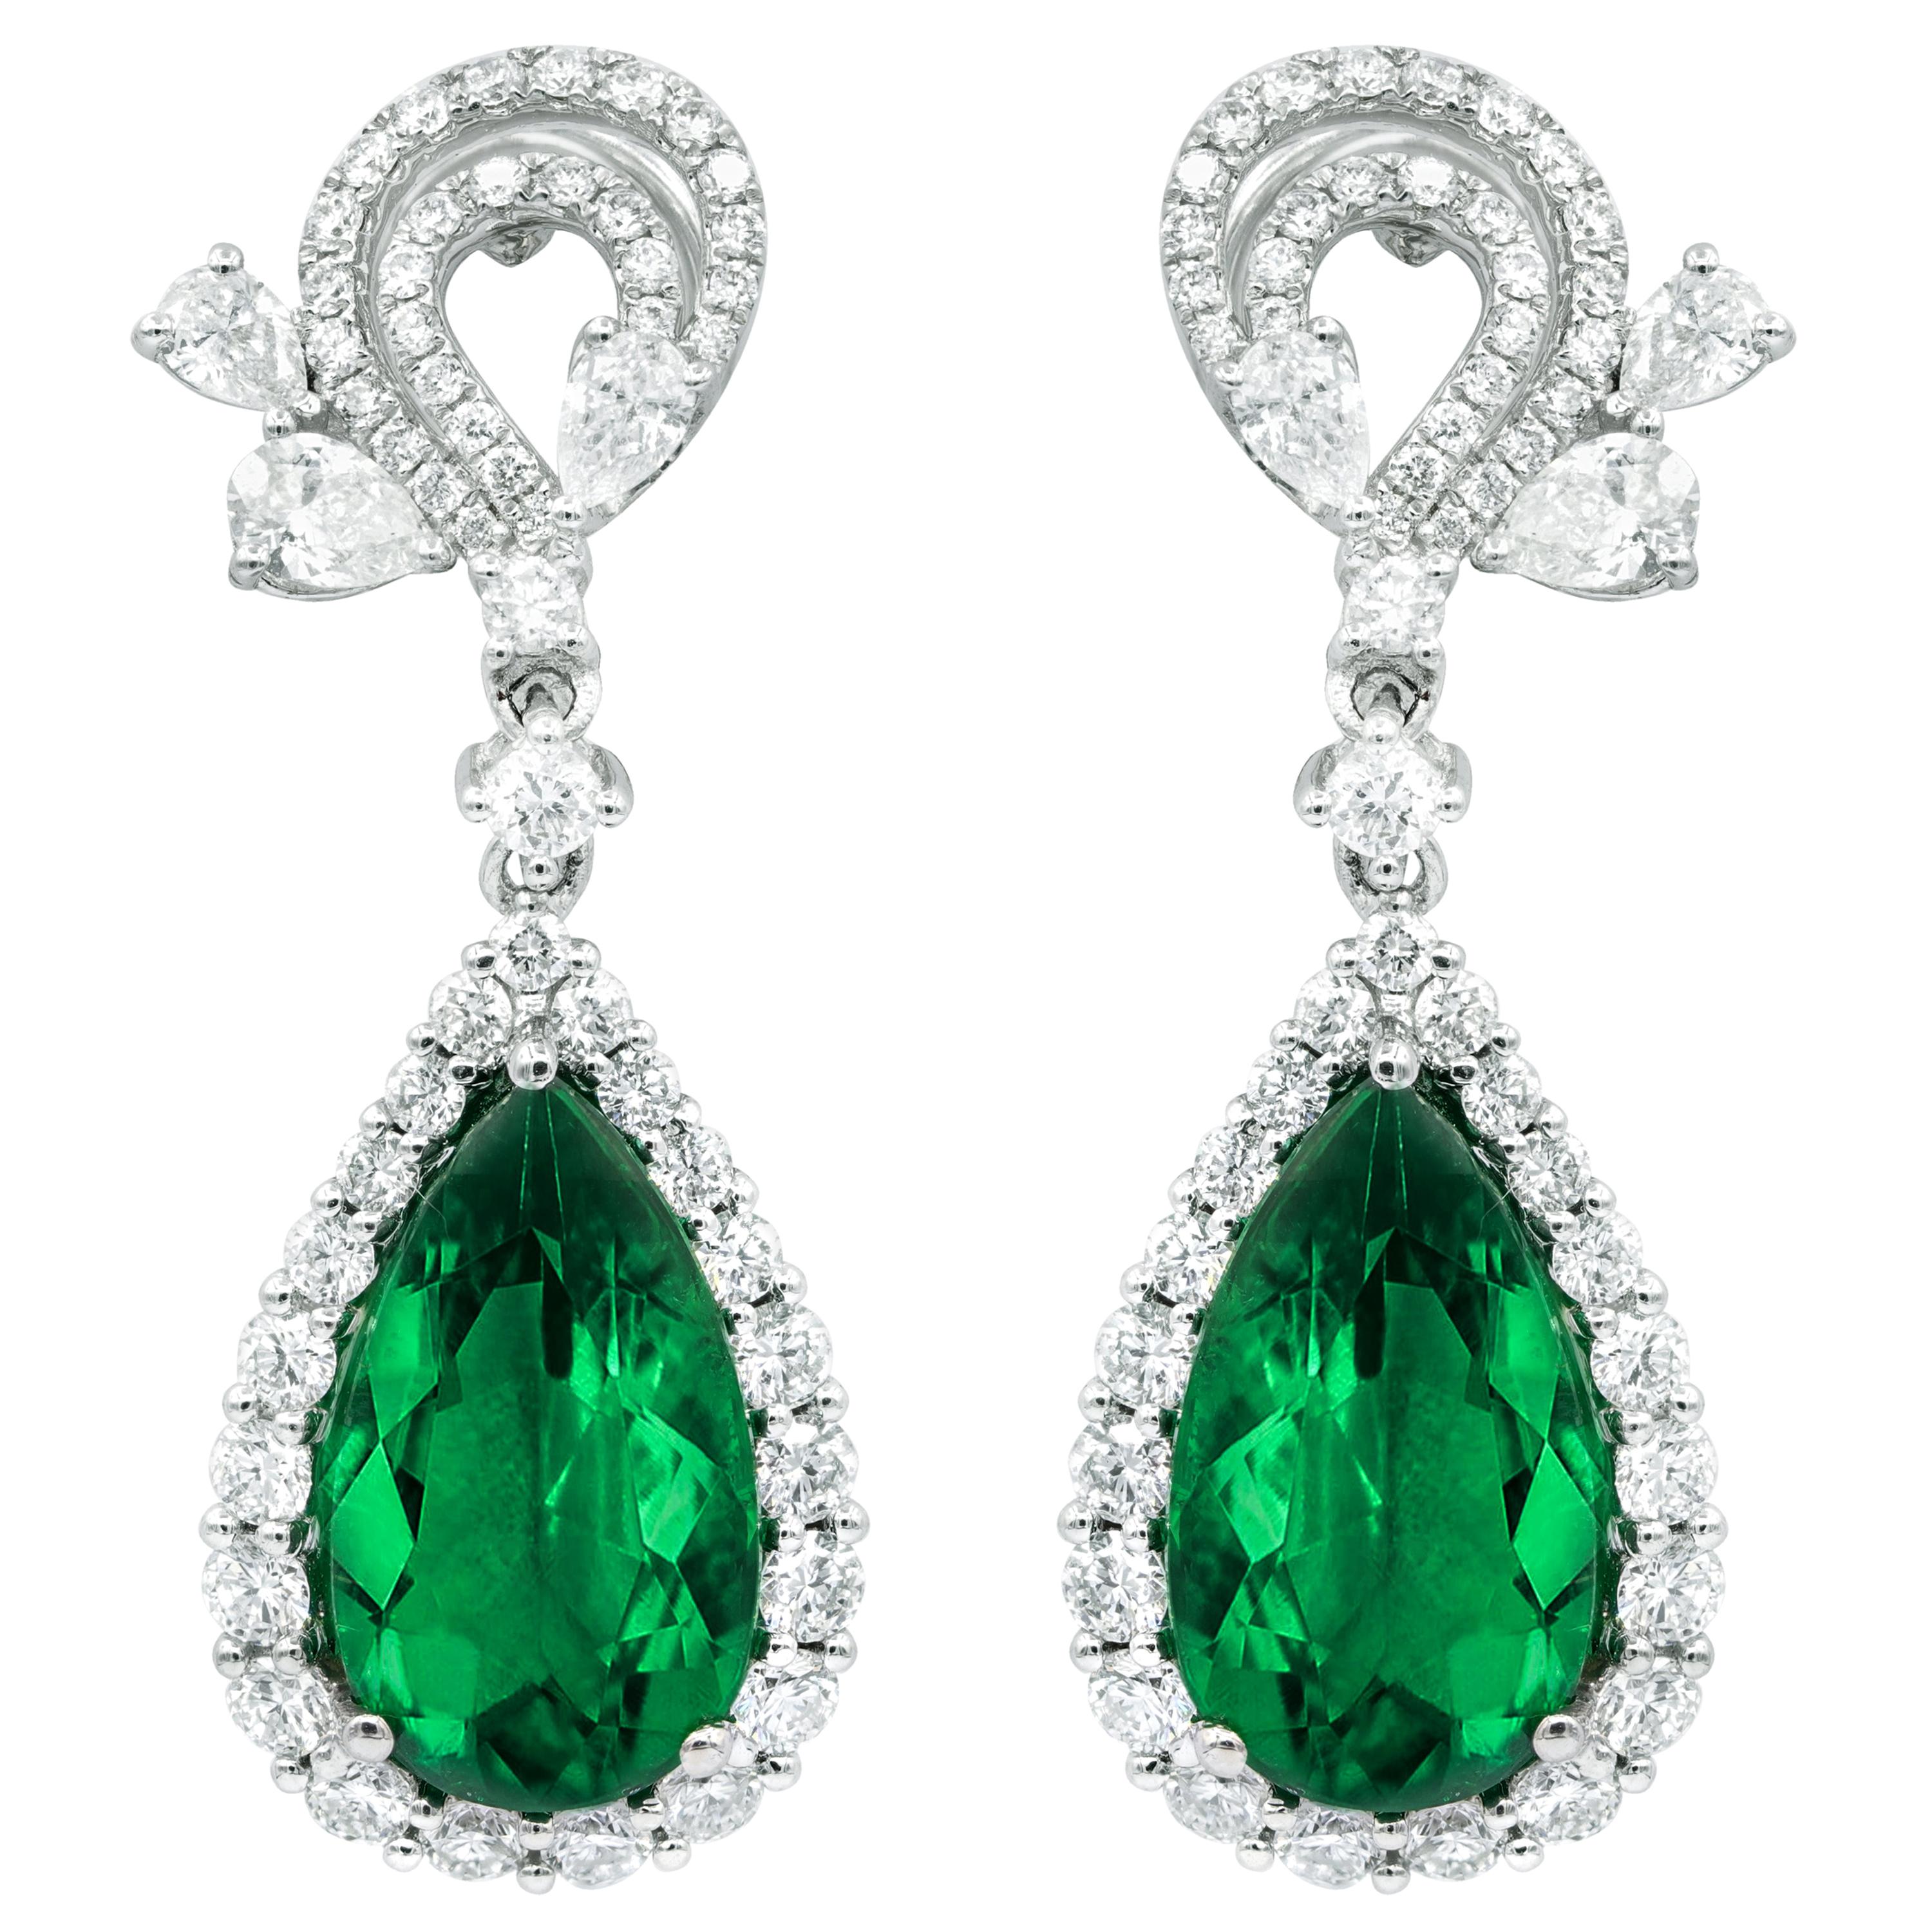 White Gold 11 Carat Diamond and Emerald Earrings